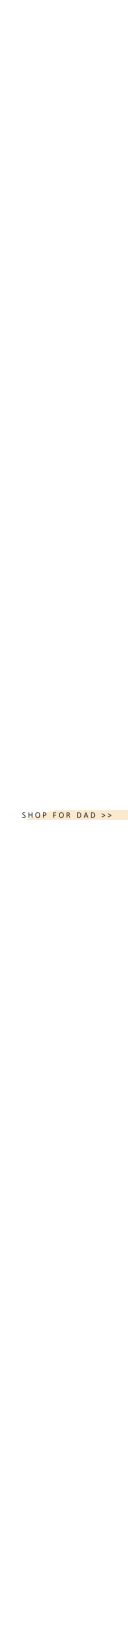 SHOP FOR DAD